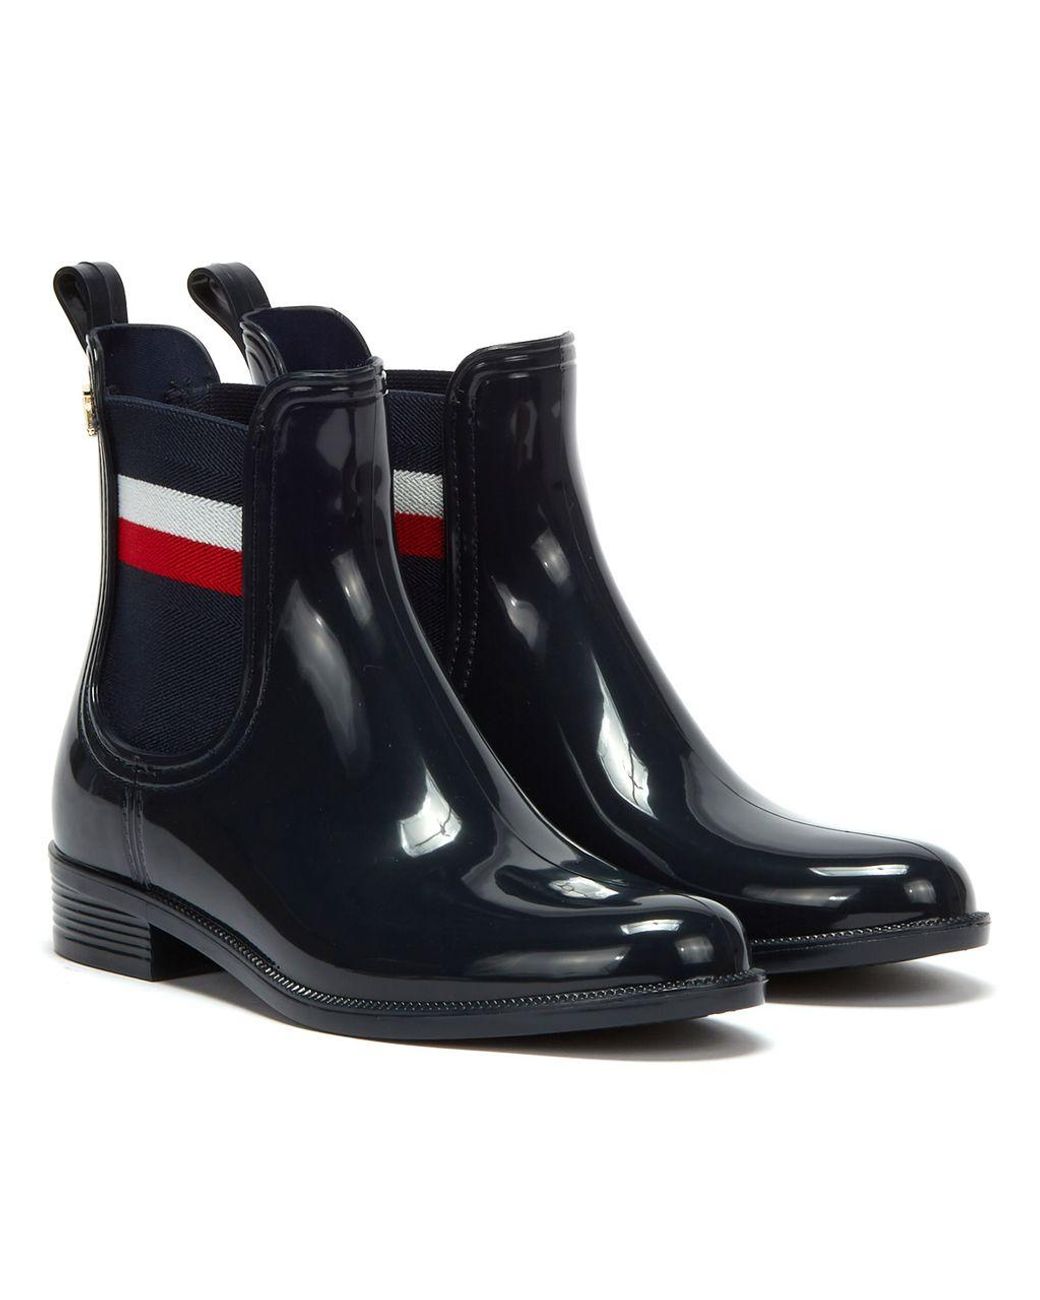 Tommy Hilfiger Corporate Rainboot in Navy (Blue) - Save 6% - Lyst